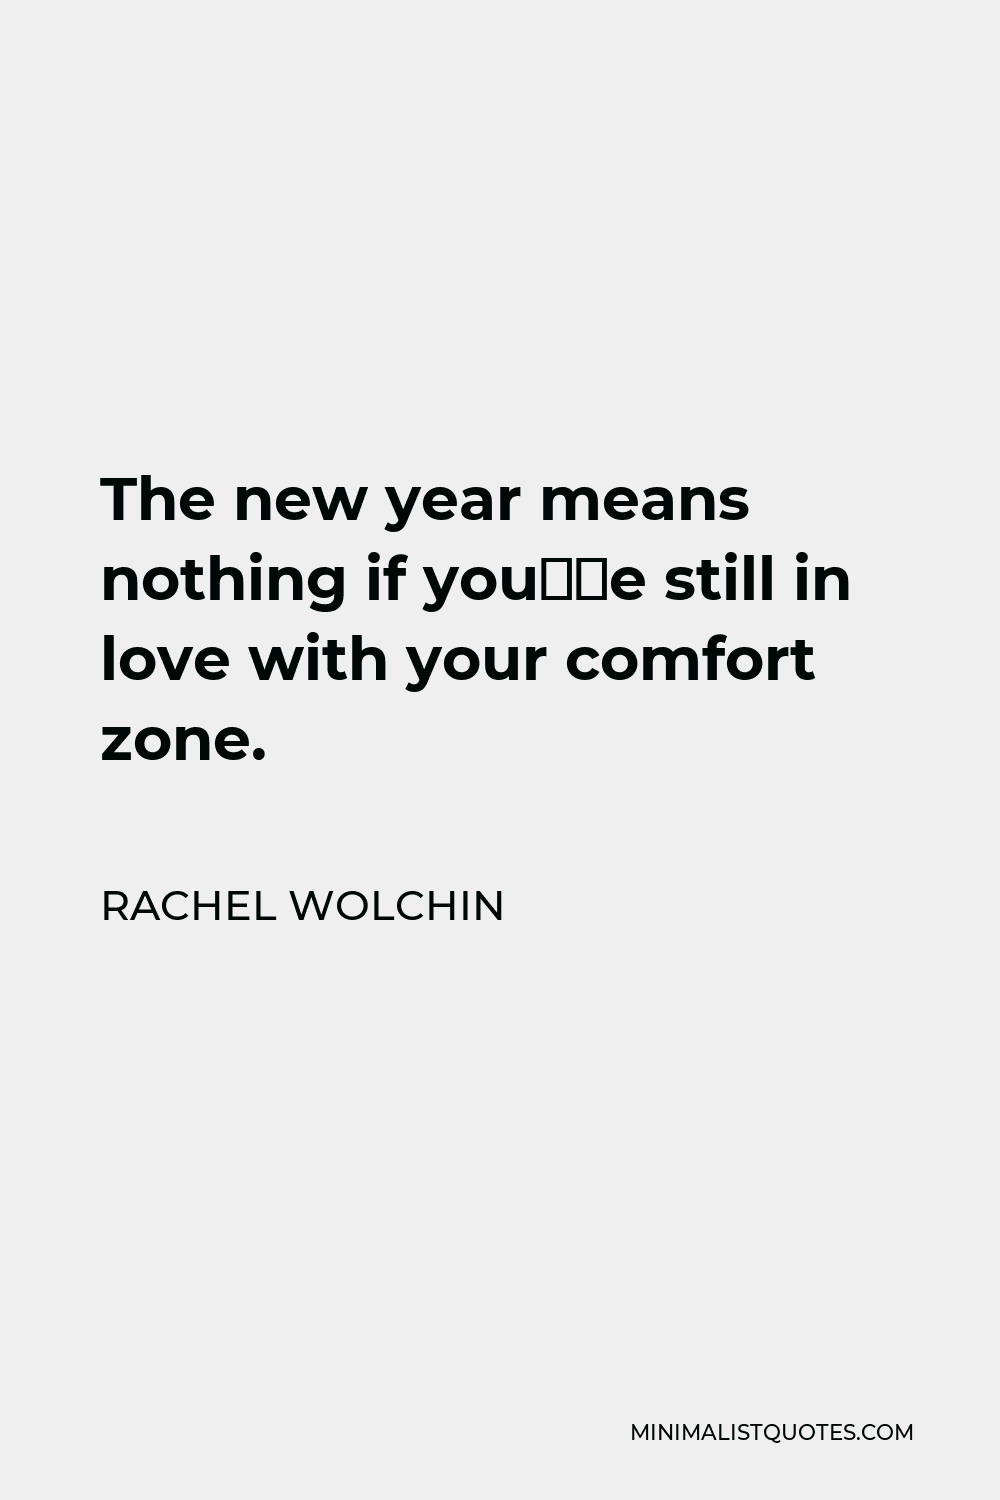 Rachel Wolchin Quote - The new year means nothing if you’re still in love with your comfort zone.